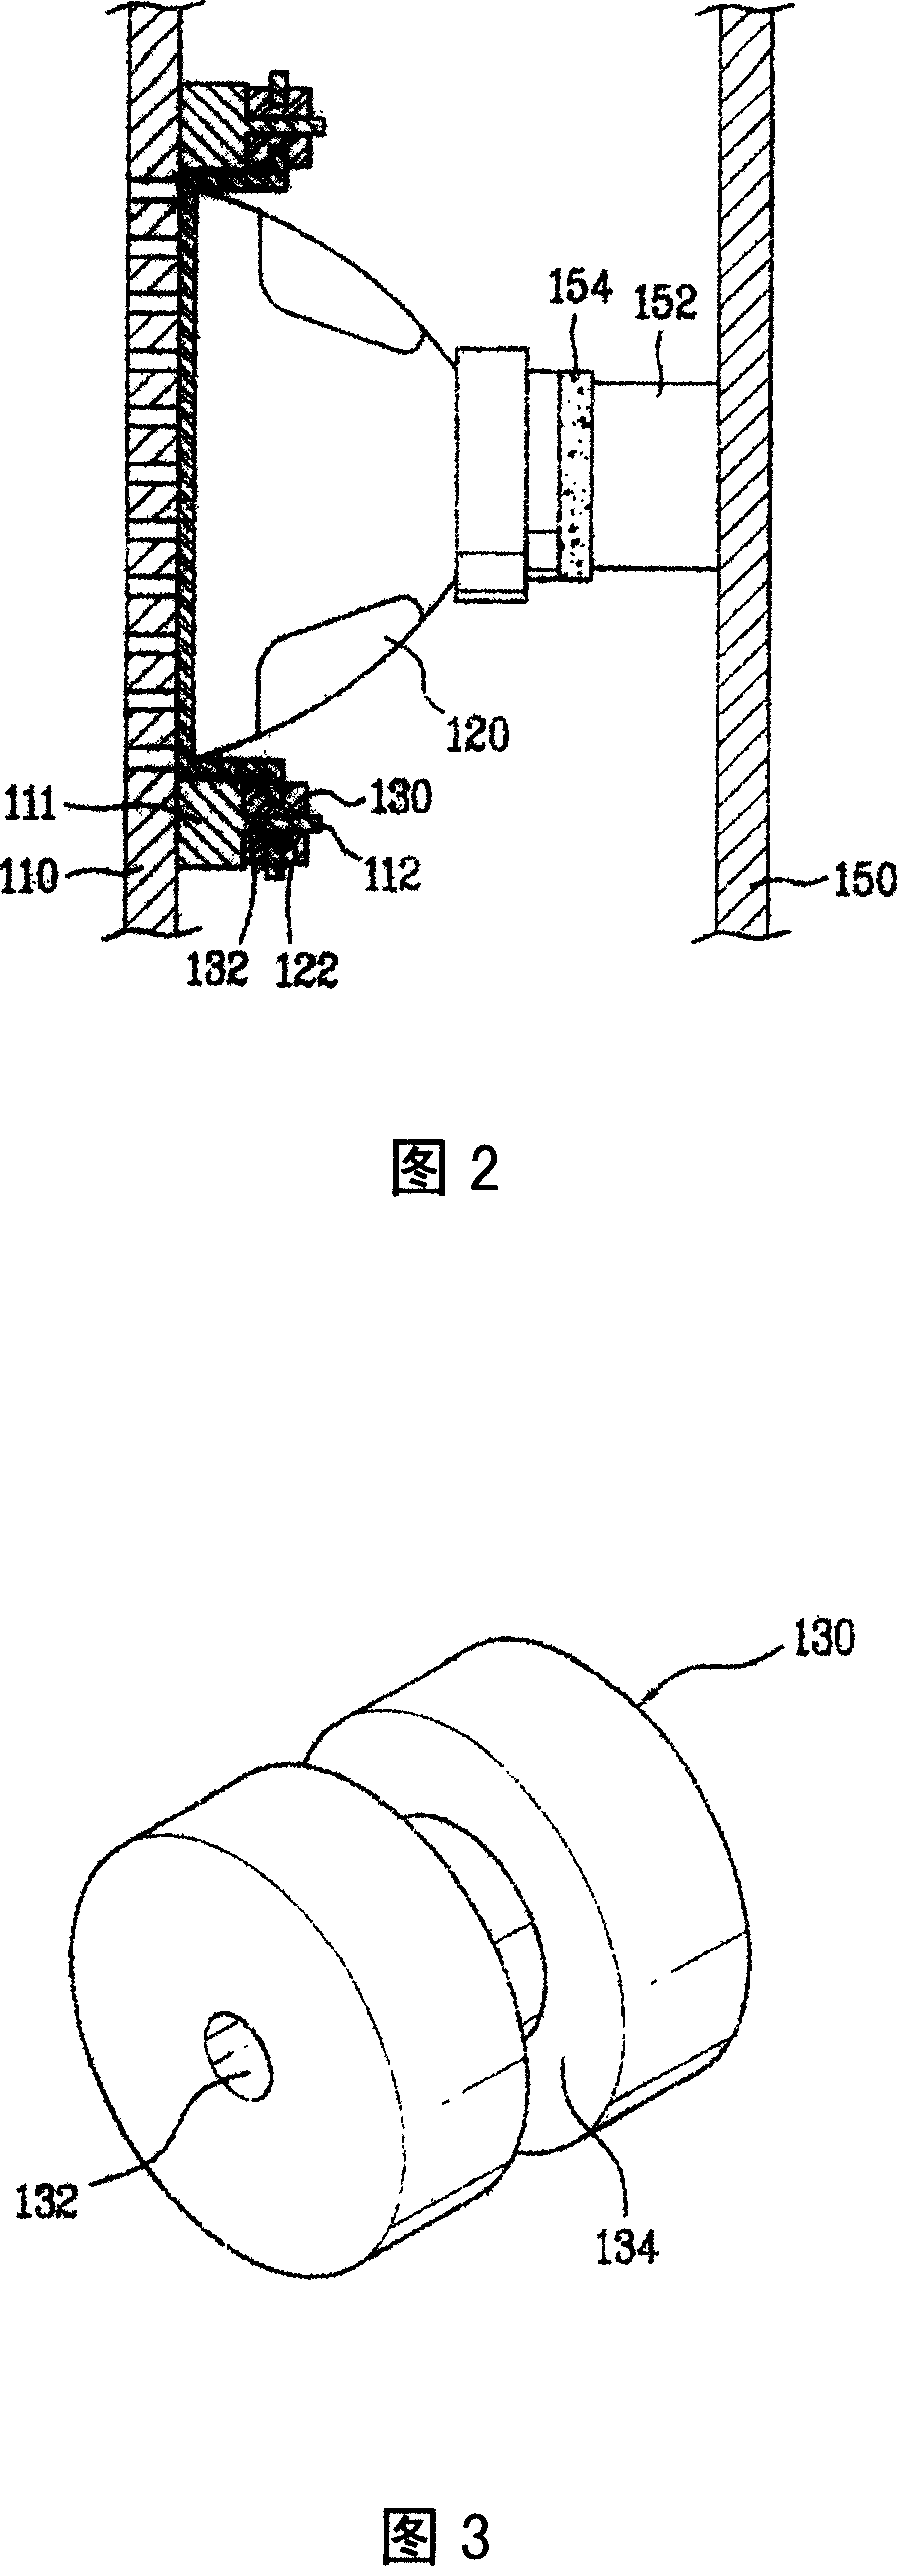 Loudspeaker support structure of picture displaying device